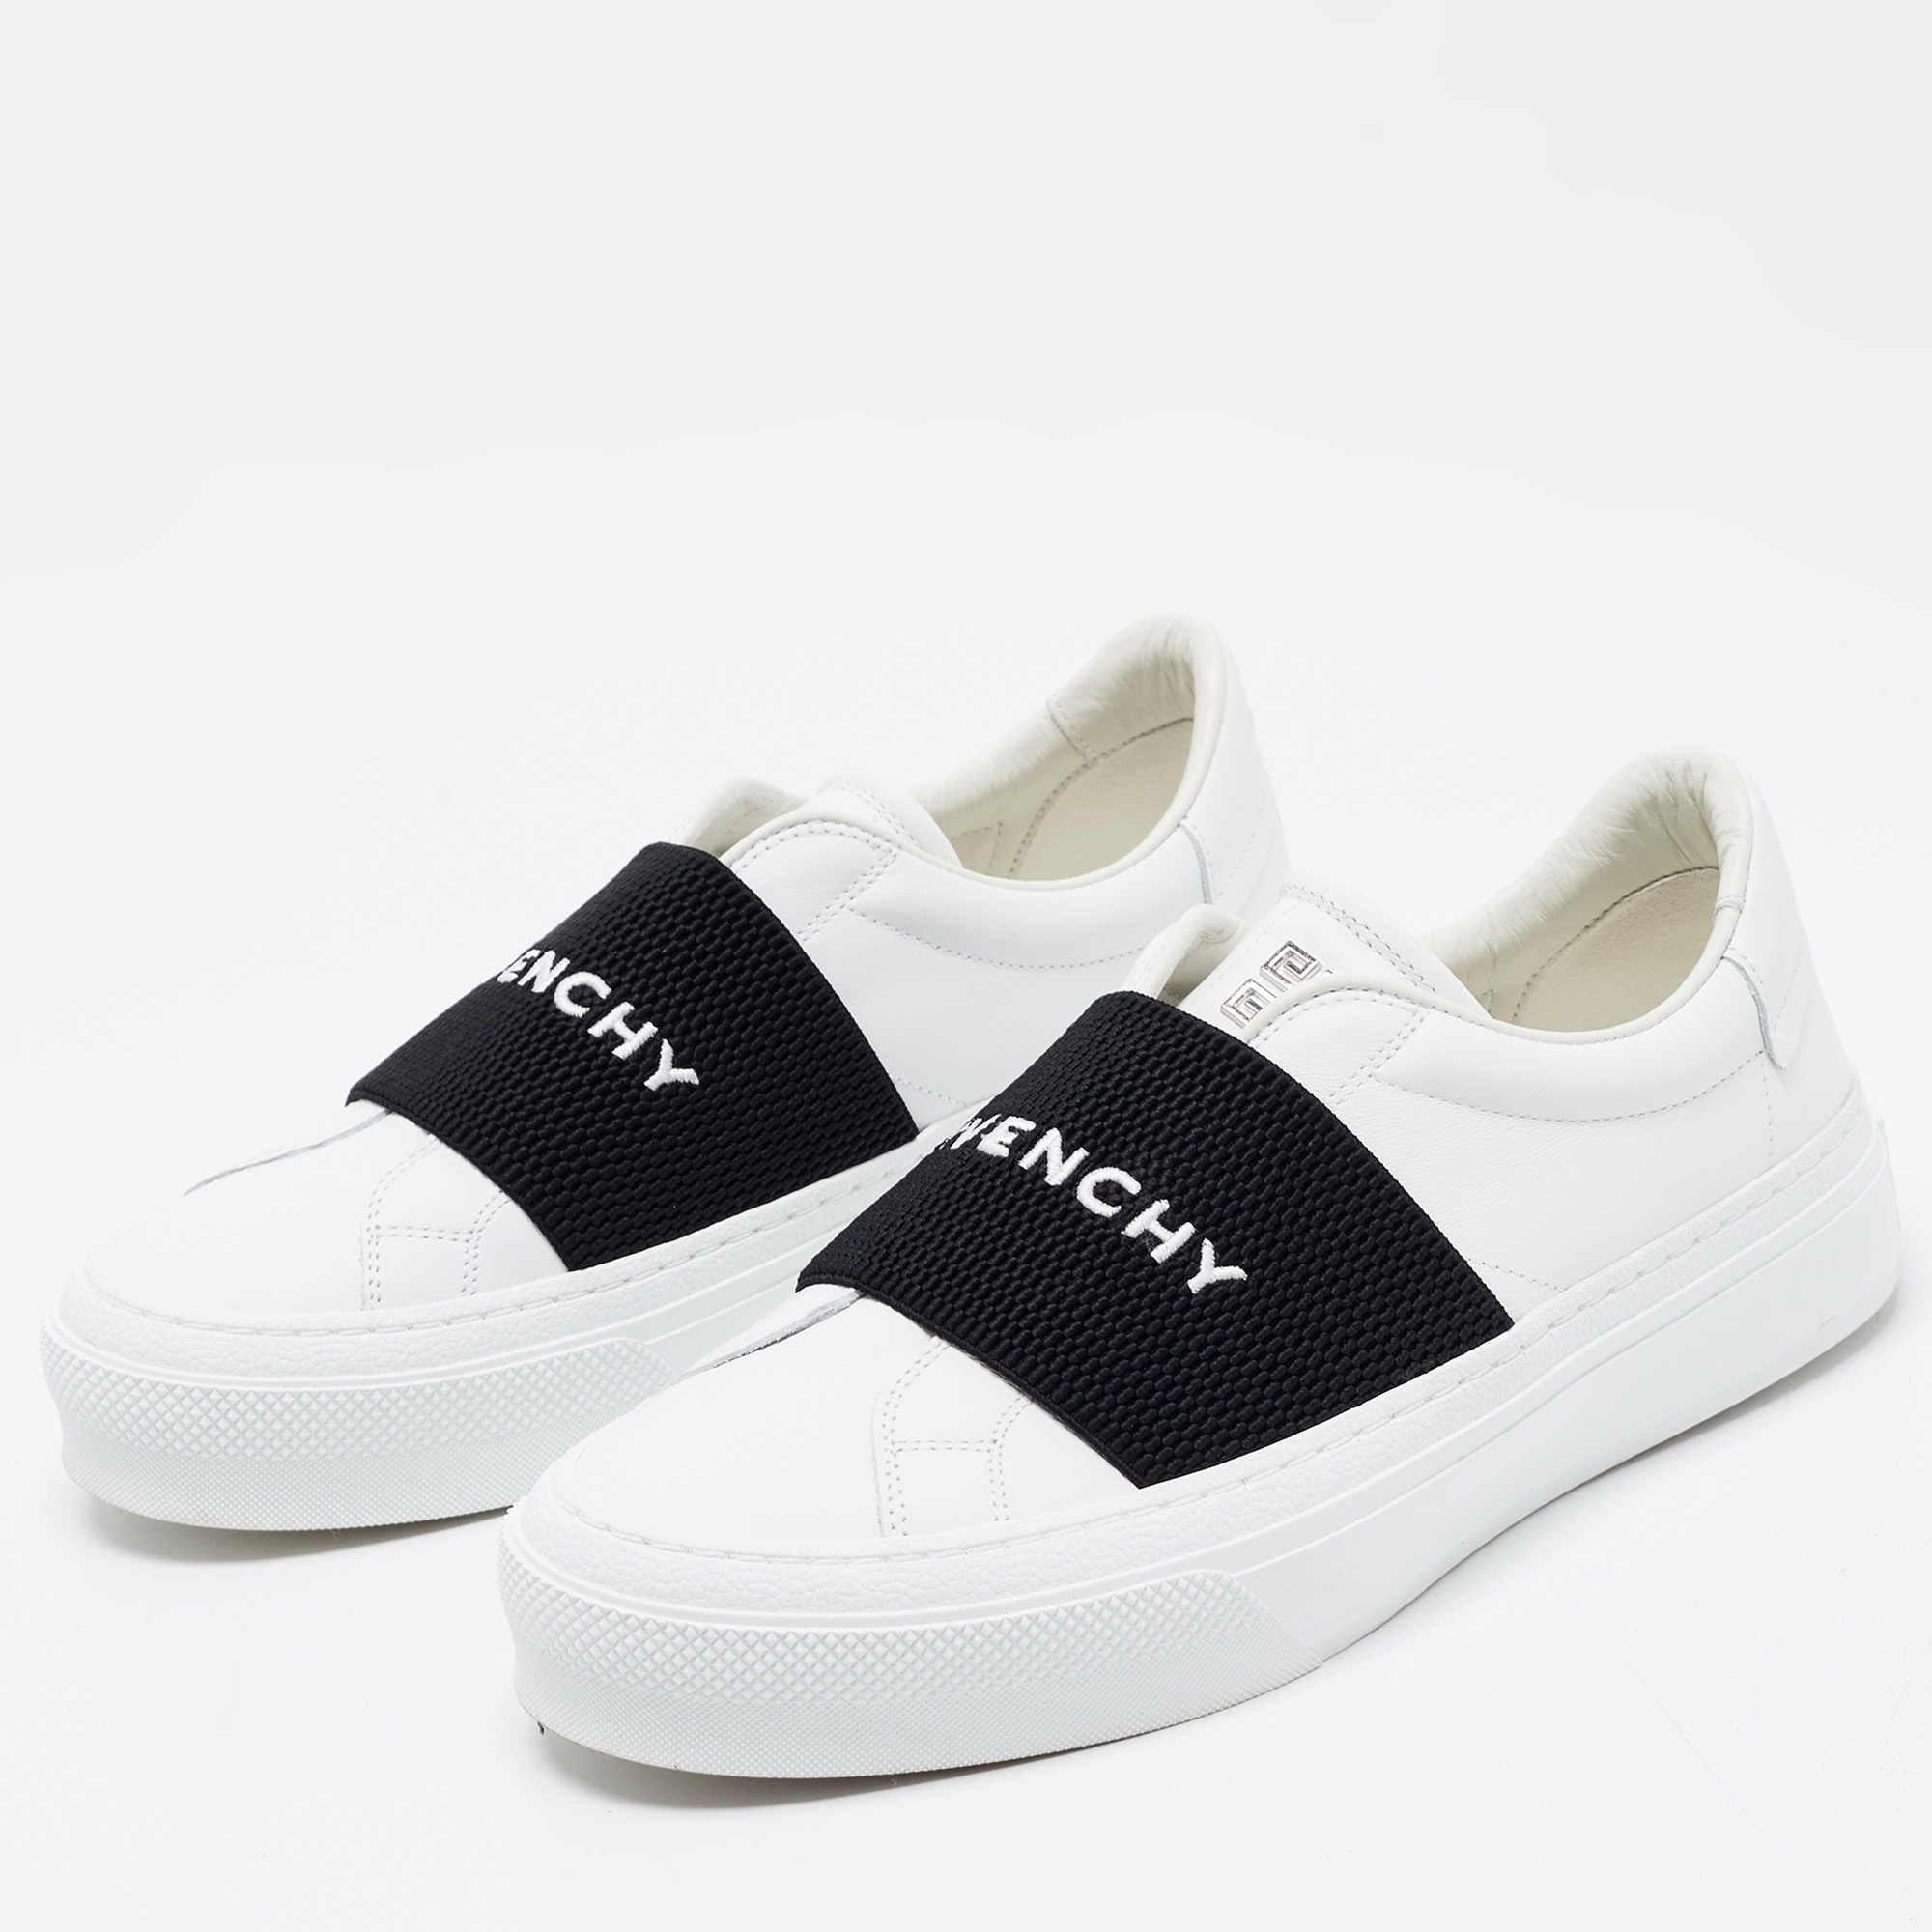 

Givenchy White/Black Leather and Elastic Band Urban Street Sneakers Size